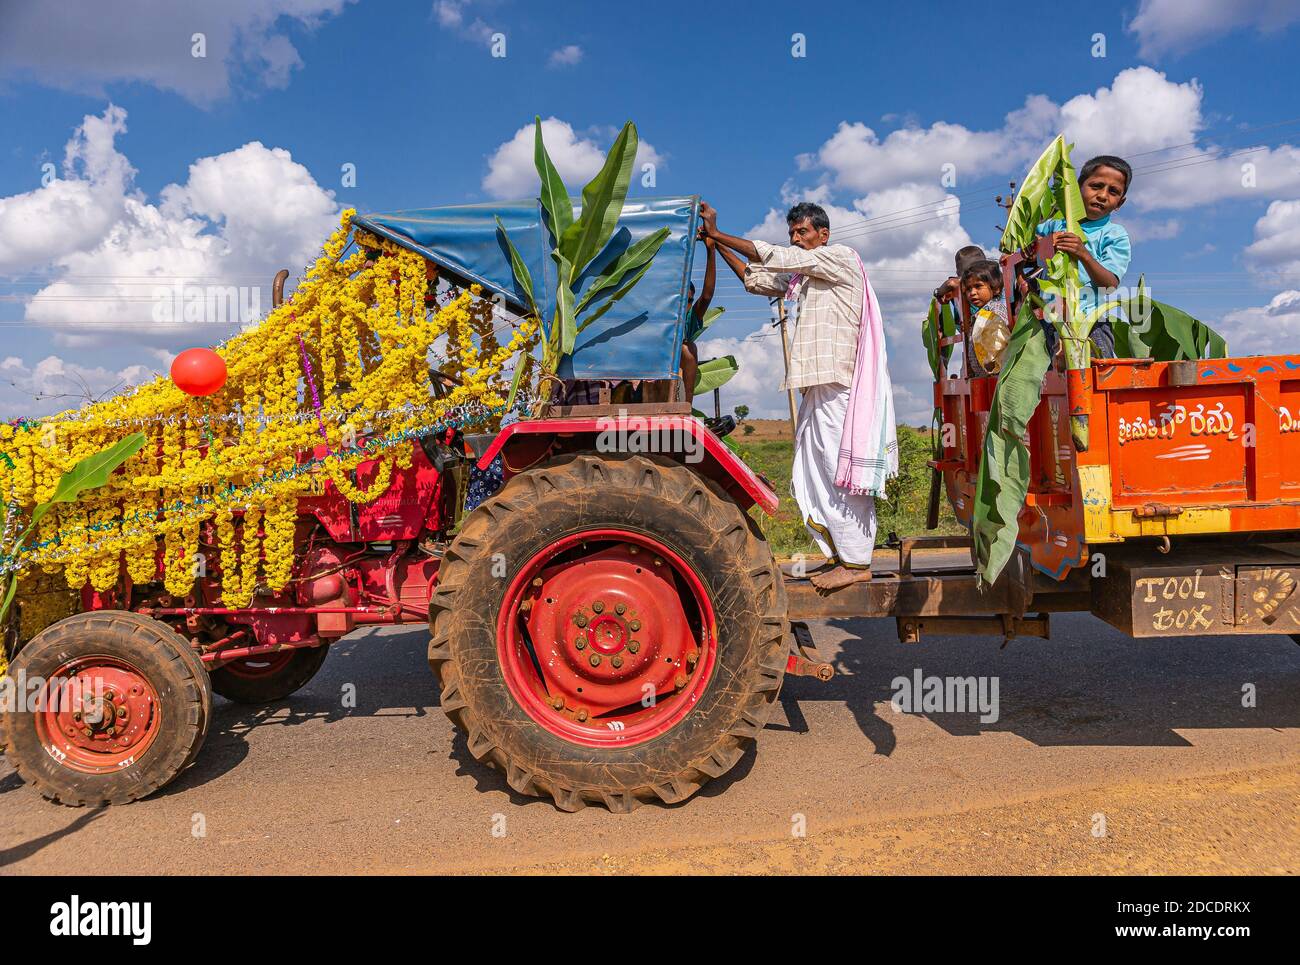 Decorated Tractor High Resolution Stock Photography and Images - Alamy